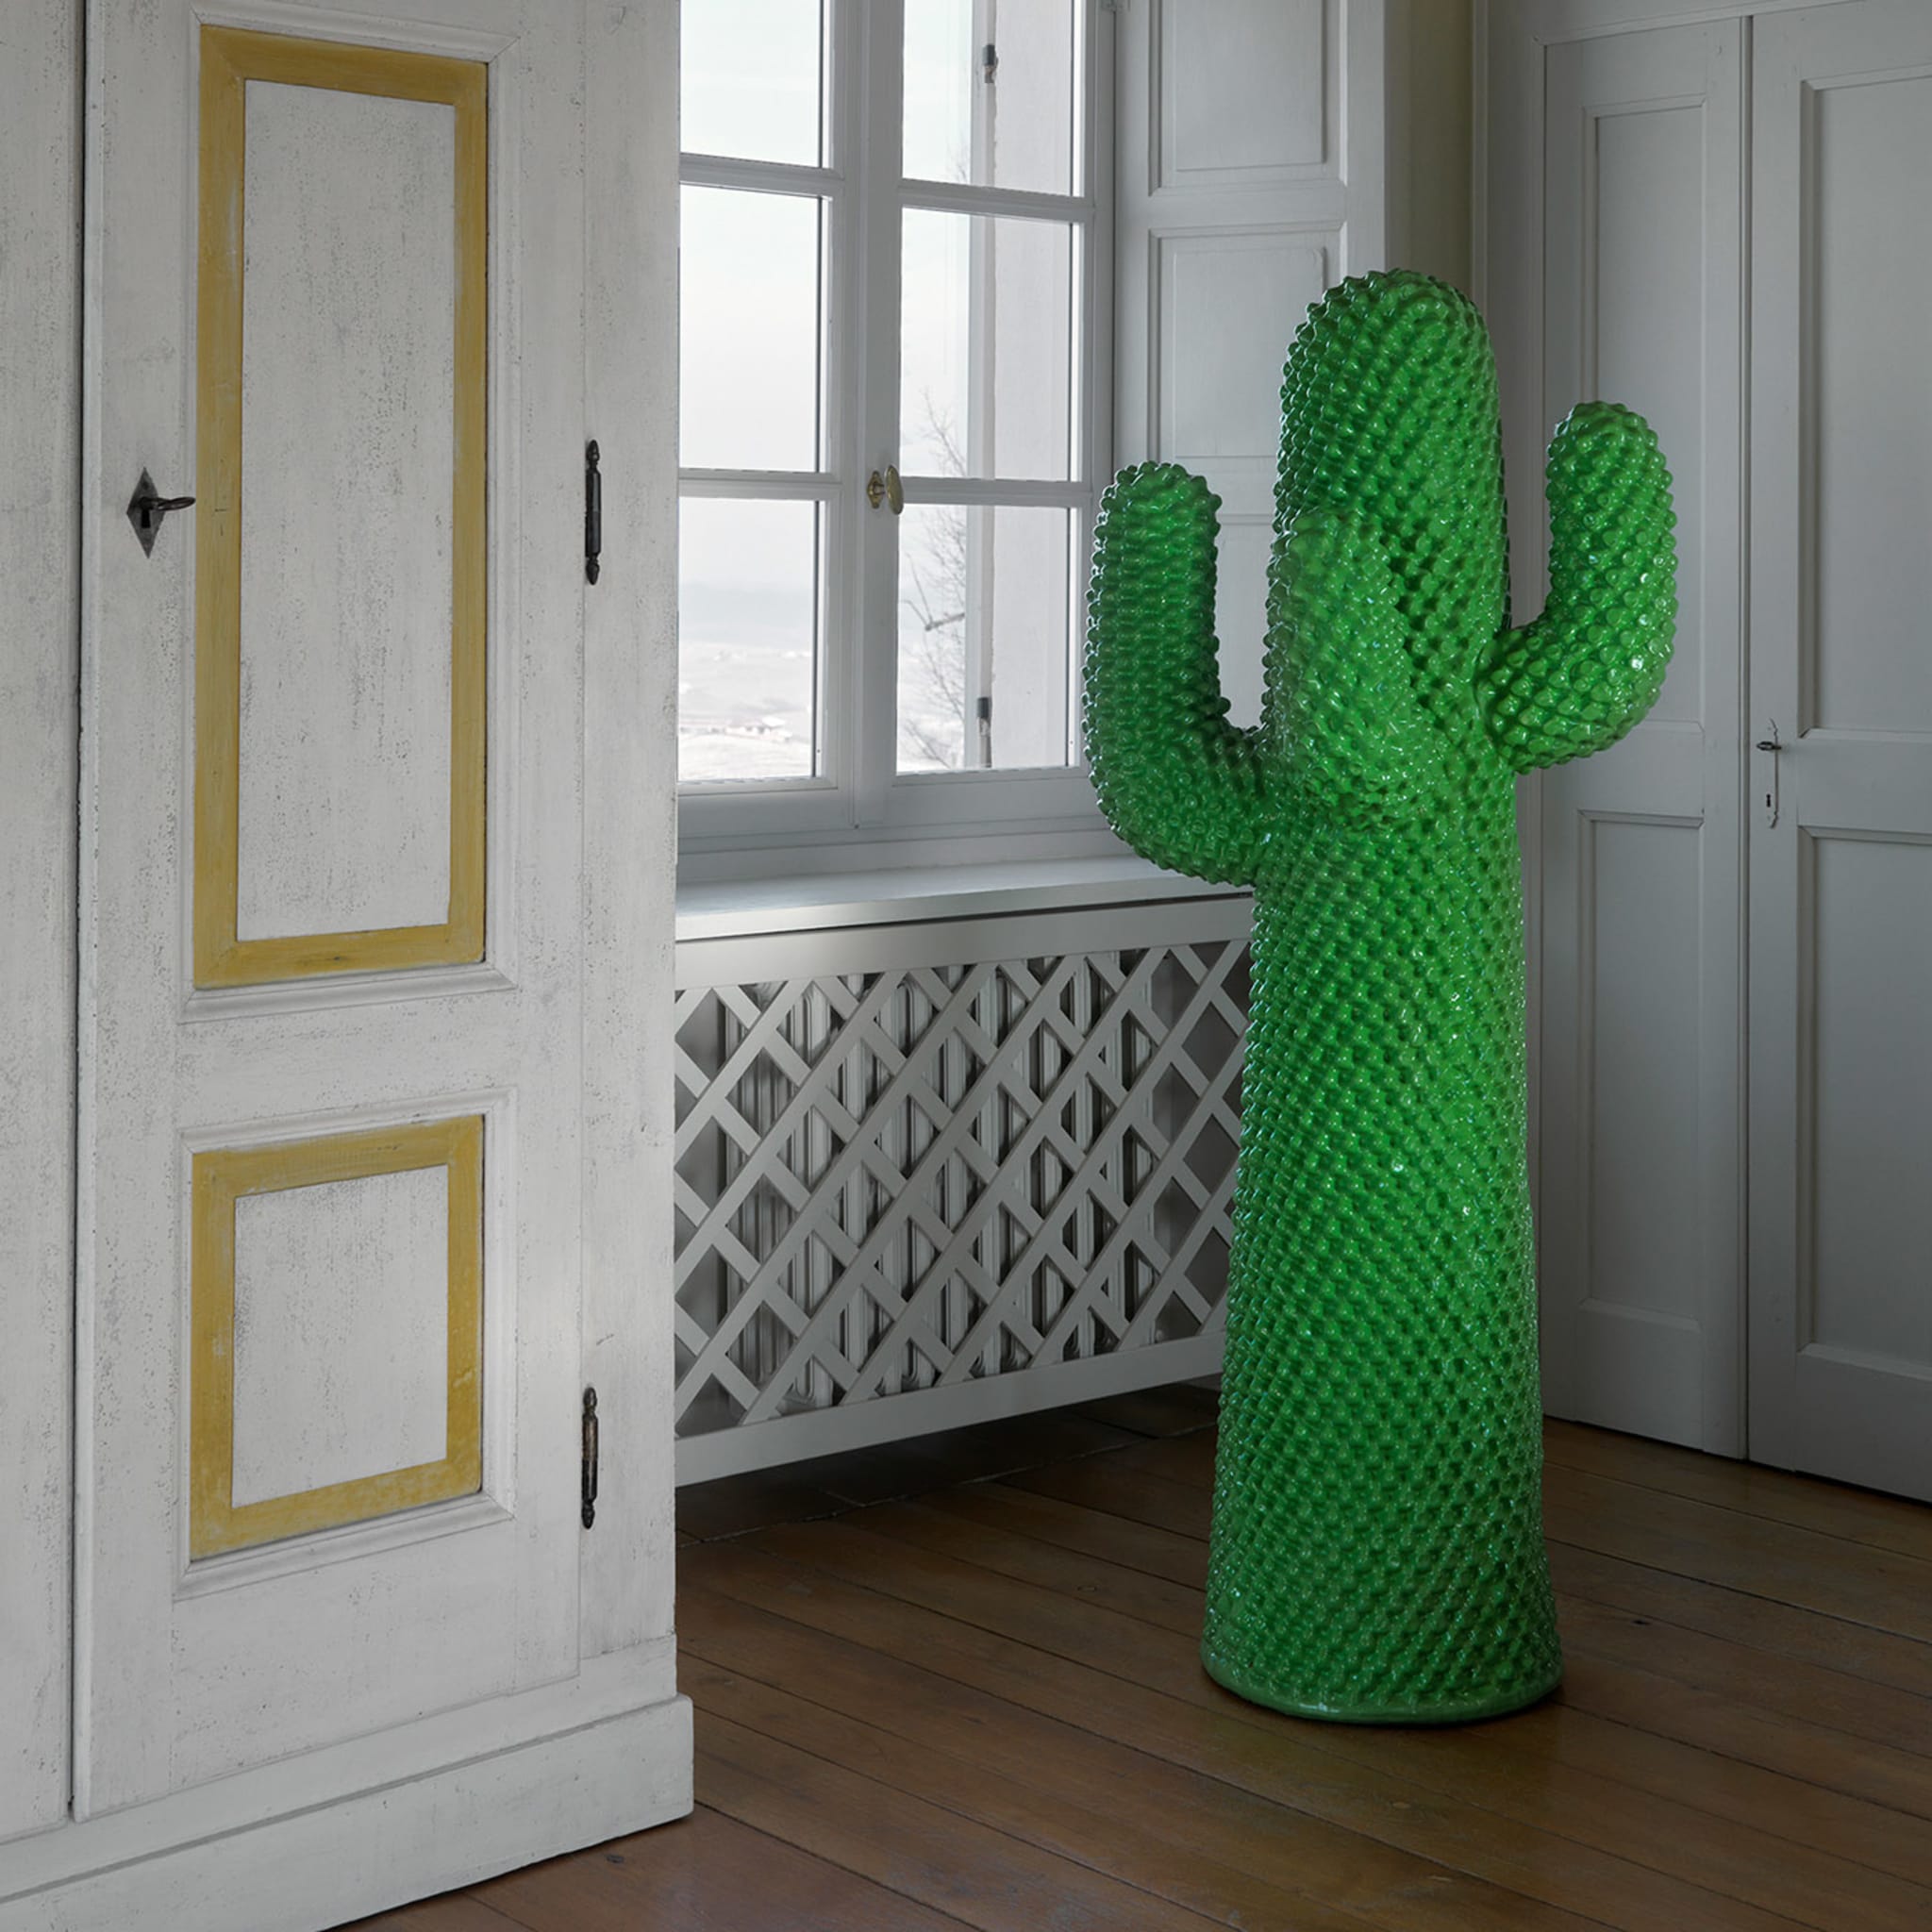 Another Green Cactus Coat Stand by Drocco/Mello - Alternative view 1